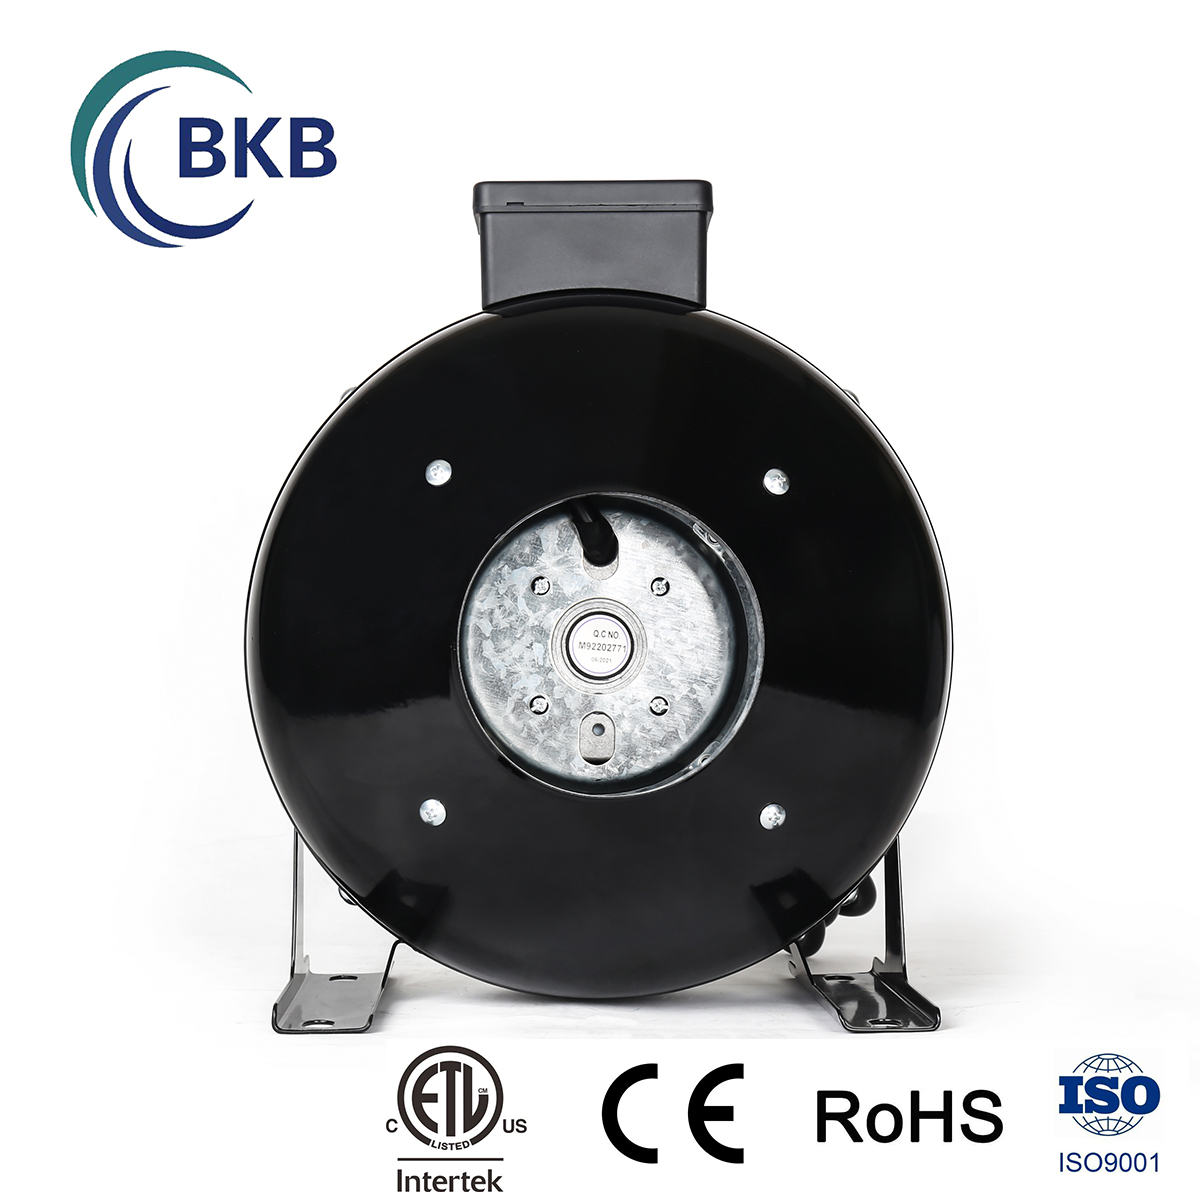 01/05/2022Inline duct fans export to USA for hydroponics-SUNLIGHT BLOWER,Centrifugal Fans, Inline Fans,Motors,Backward curved centrifugal fans ,Forward curved centrifugal fans ,inlet fans, EC fans